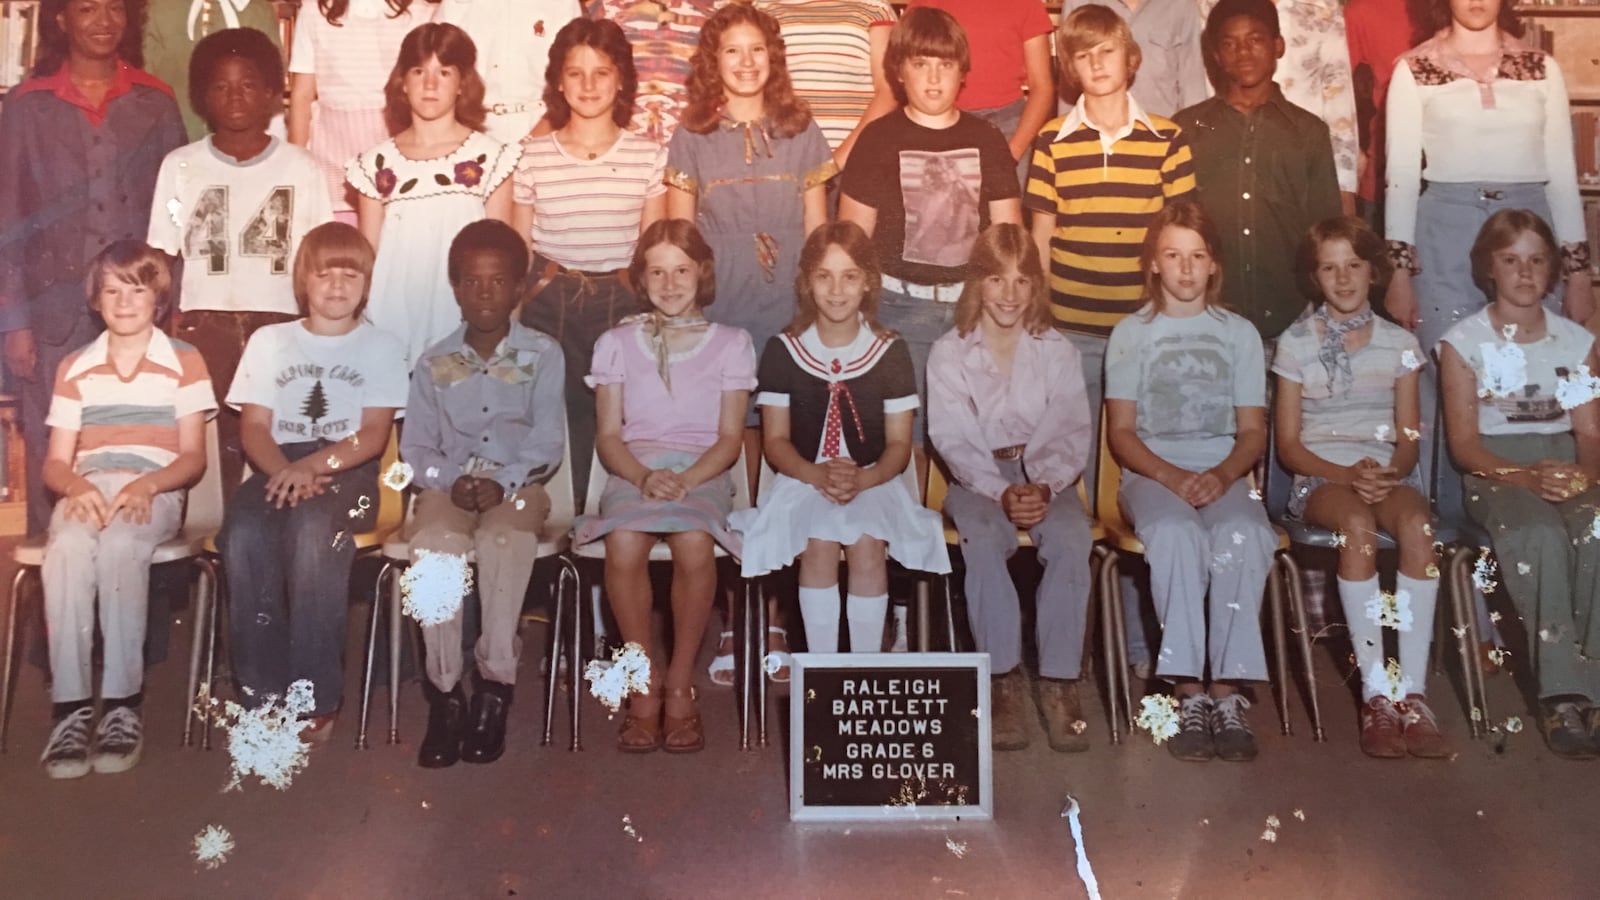 The integrated sixth grade class at Raleigh Bartlett-Meadows in the mid-1970s. Jacqueline Hill-Ferby, who was bused to the school from her home 45 minutes away, is standing on the far left, wearing green, behind one of her first professional role models and teacher, Mrs. Glover. Hill-Ferby, who became a teacher herself, says busing was a positive experience for her.